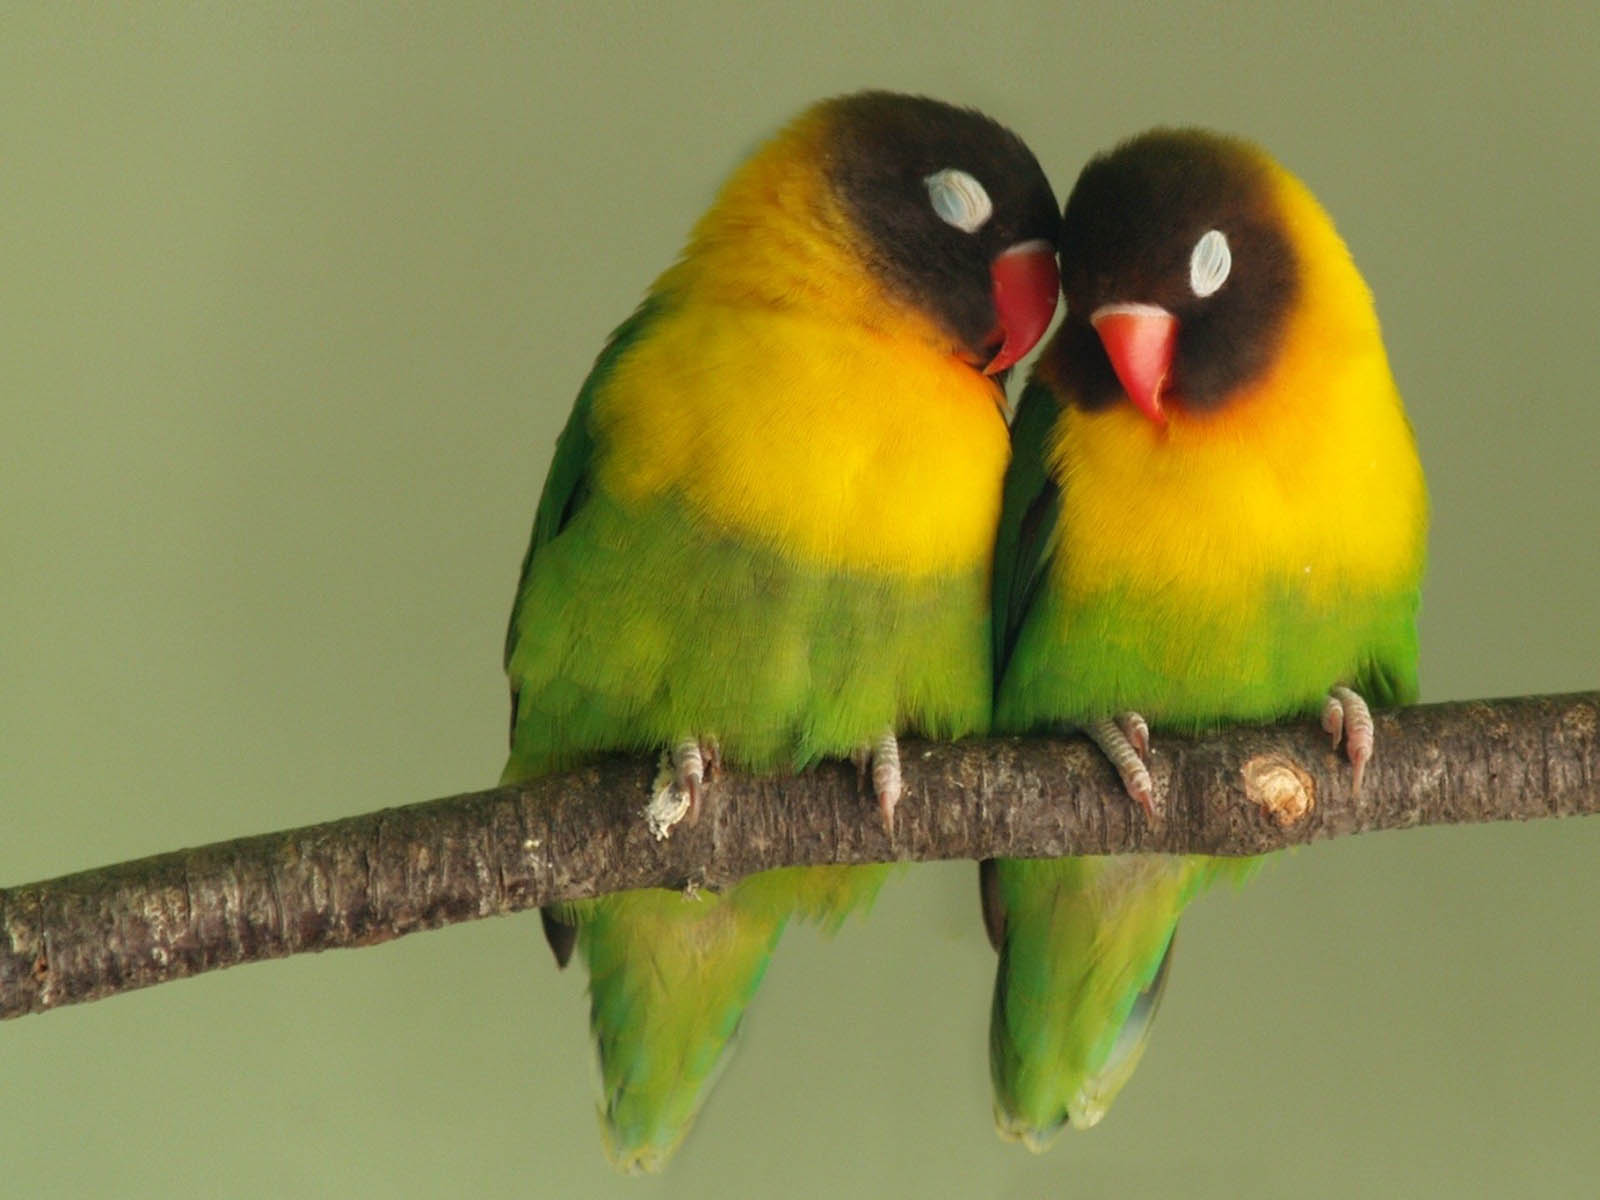 Tag Love Birds Wallpapers Backgrounds PhotosImages and Pictures